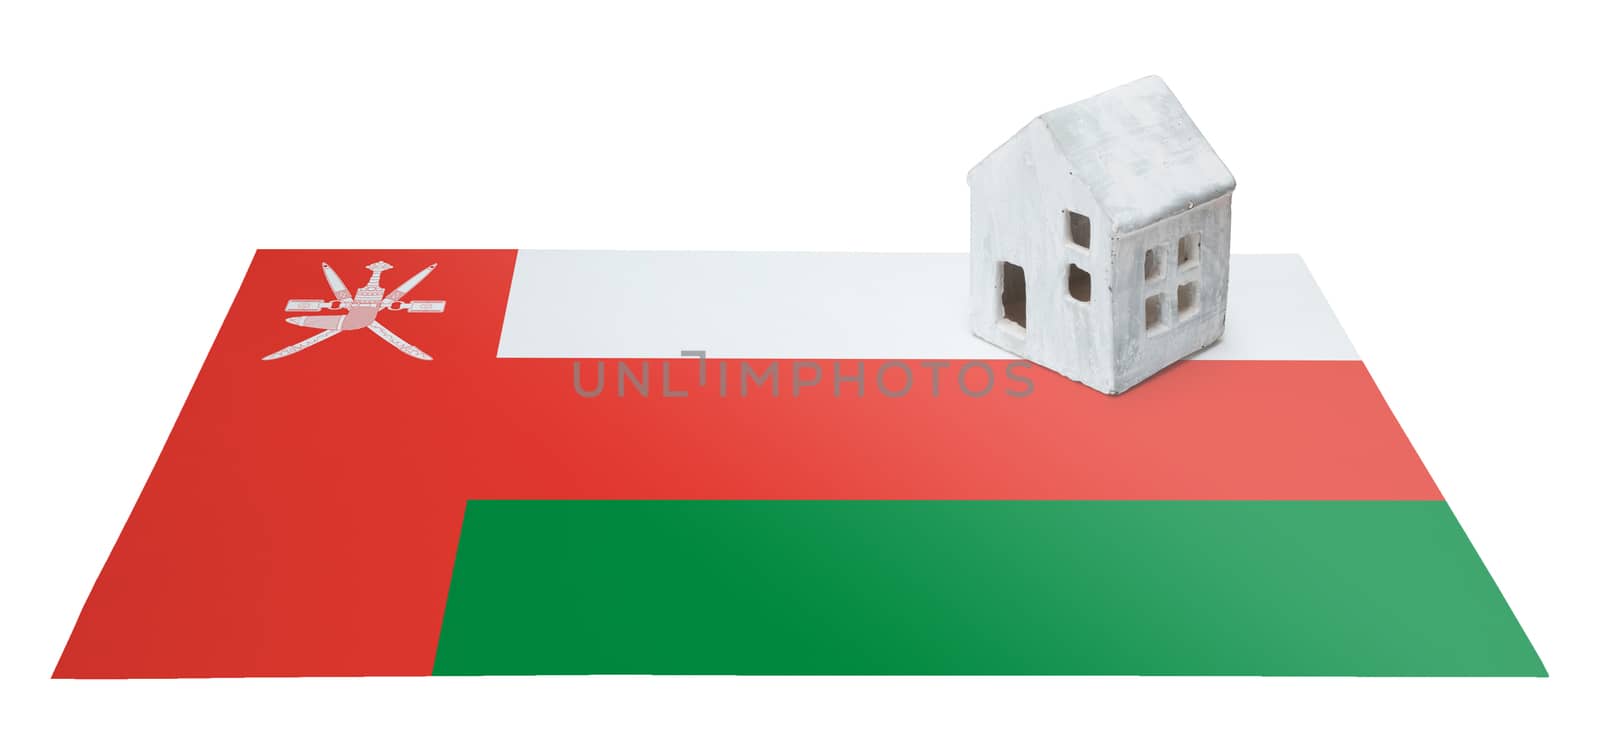 Small house on a flag - Oman by michaklootwijk